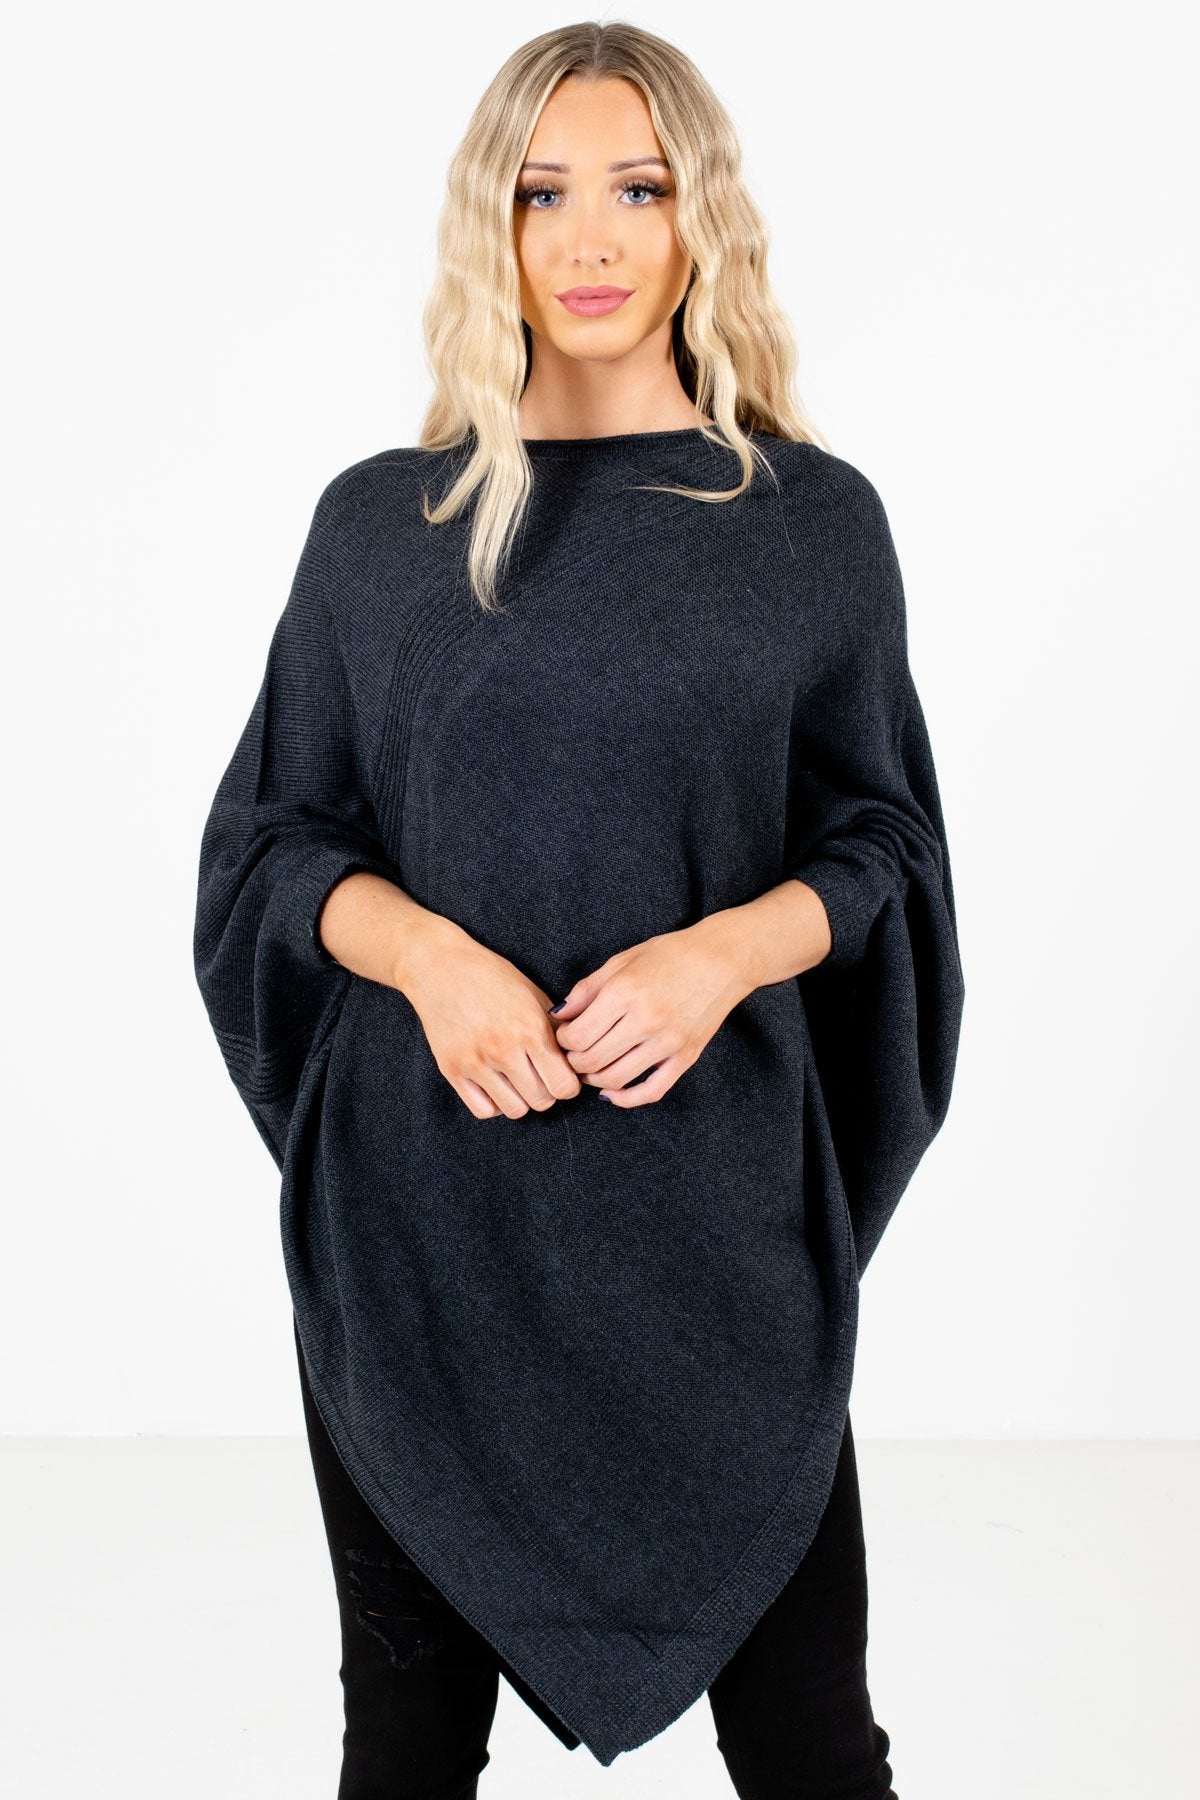 Charcoal Gray High-Quality Knit Material Boutique Ponchos for Women